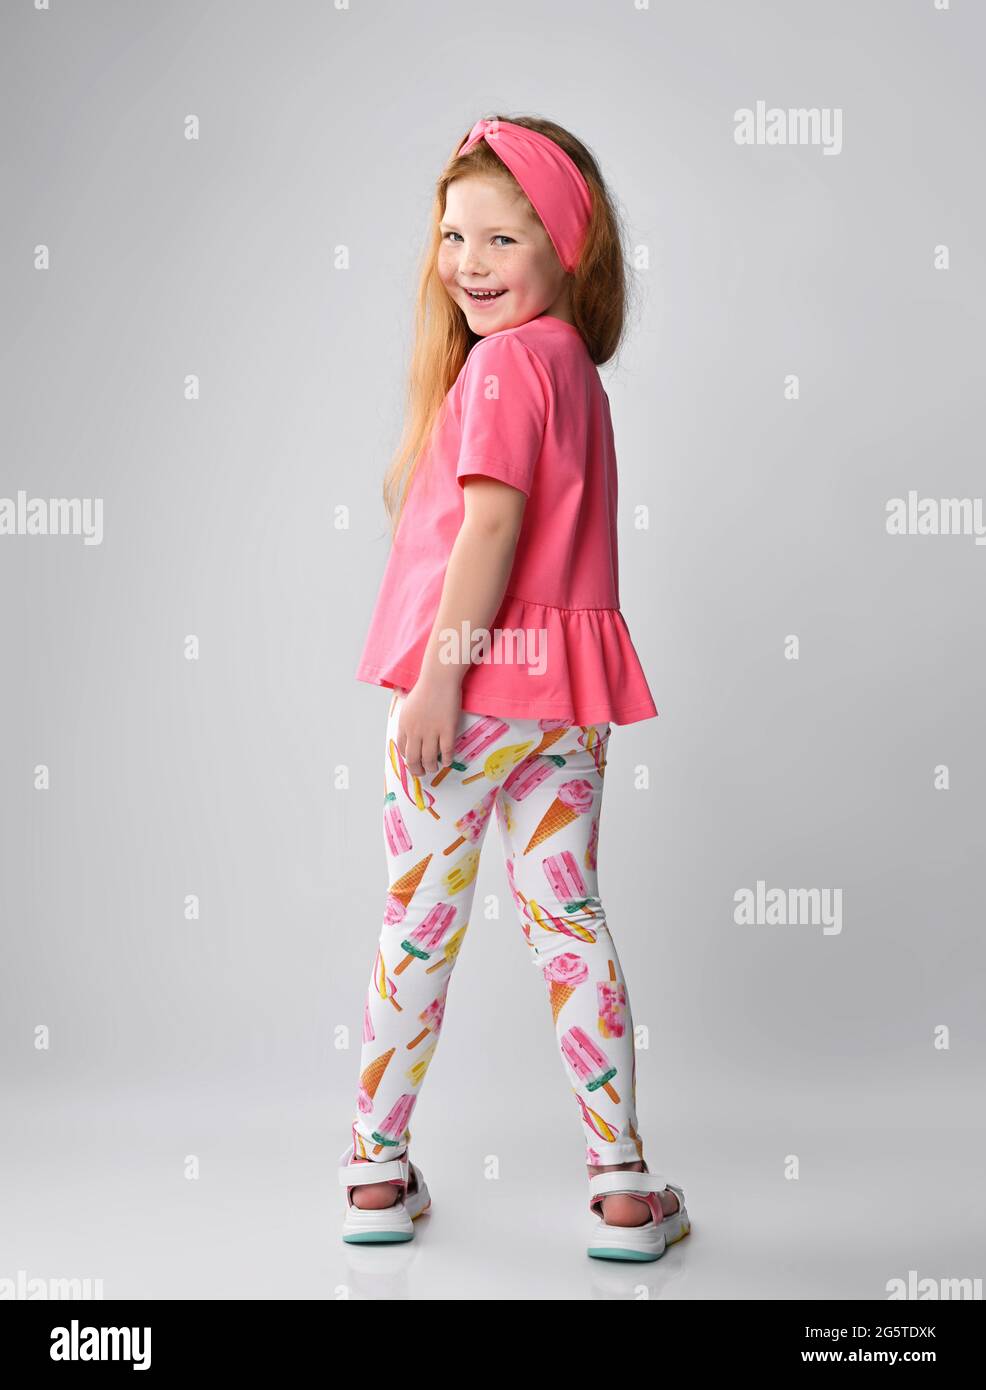 Smiling red-haired kid girl in pink t-shirt, colorful pants and sandals stands with her back to camera and turned Stock Photo